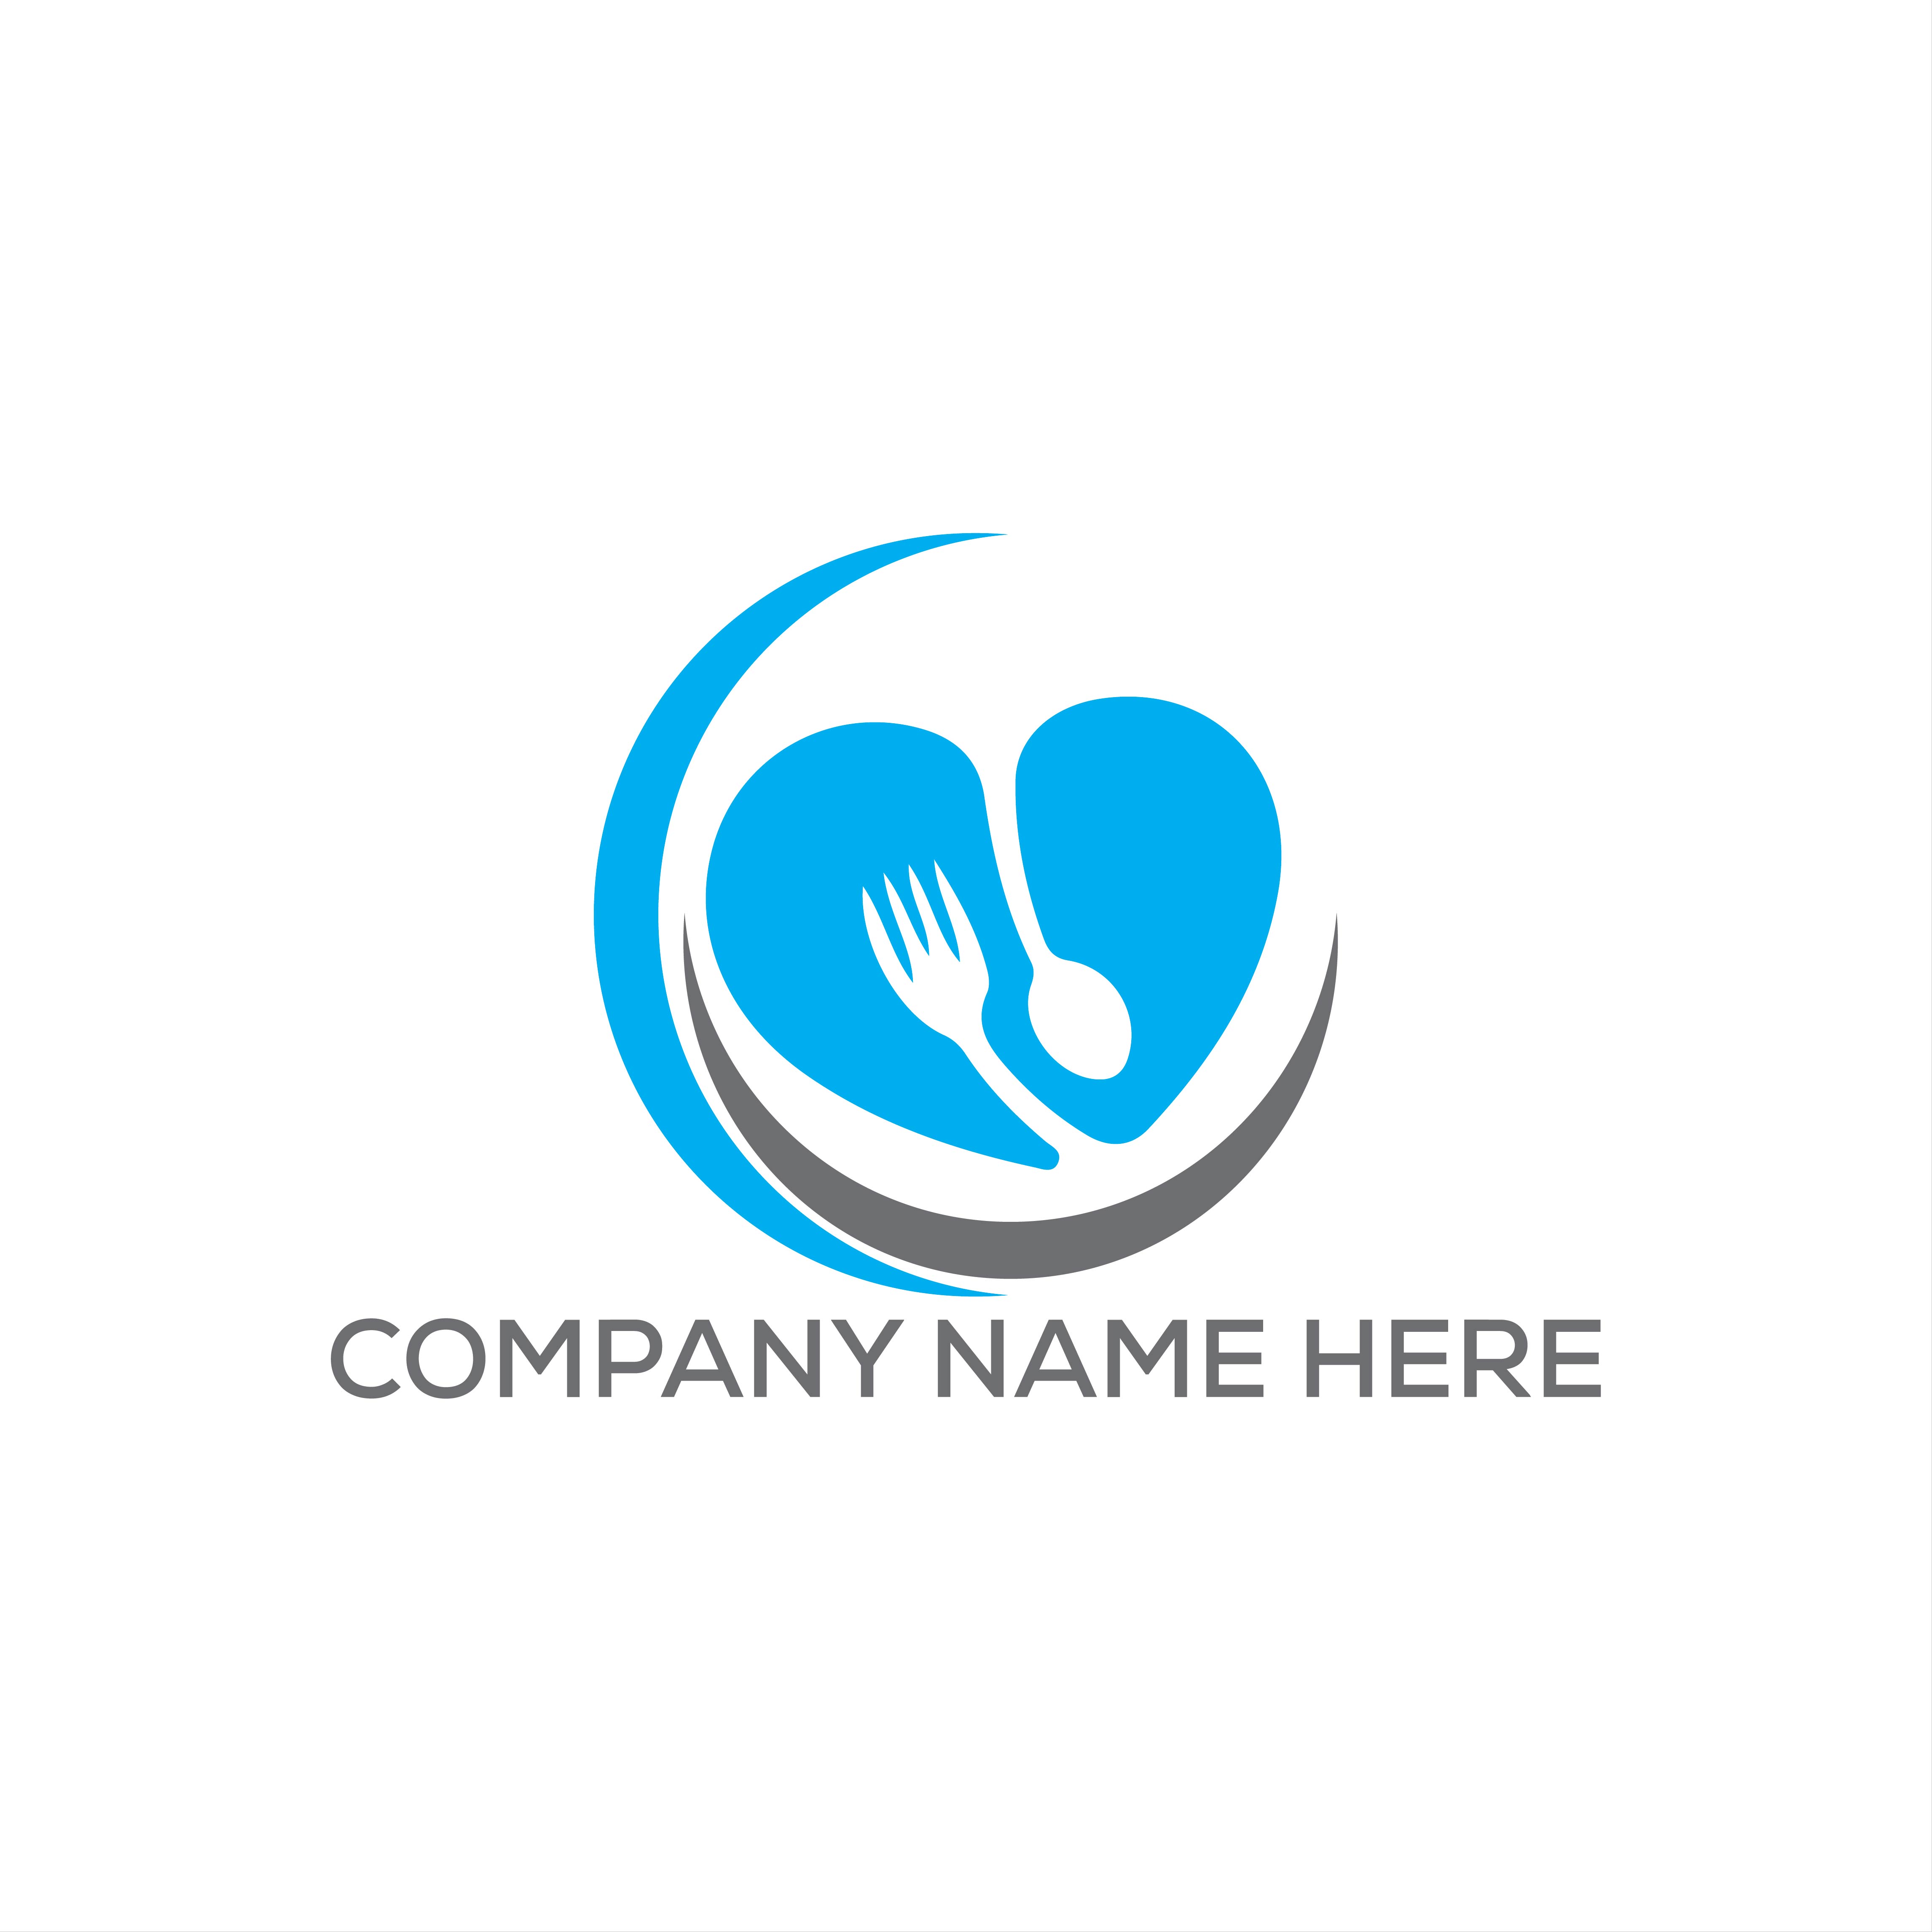 Restaurant Logo or Icon Design Vector Image Template cover image.